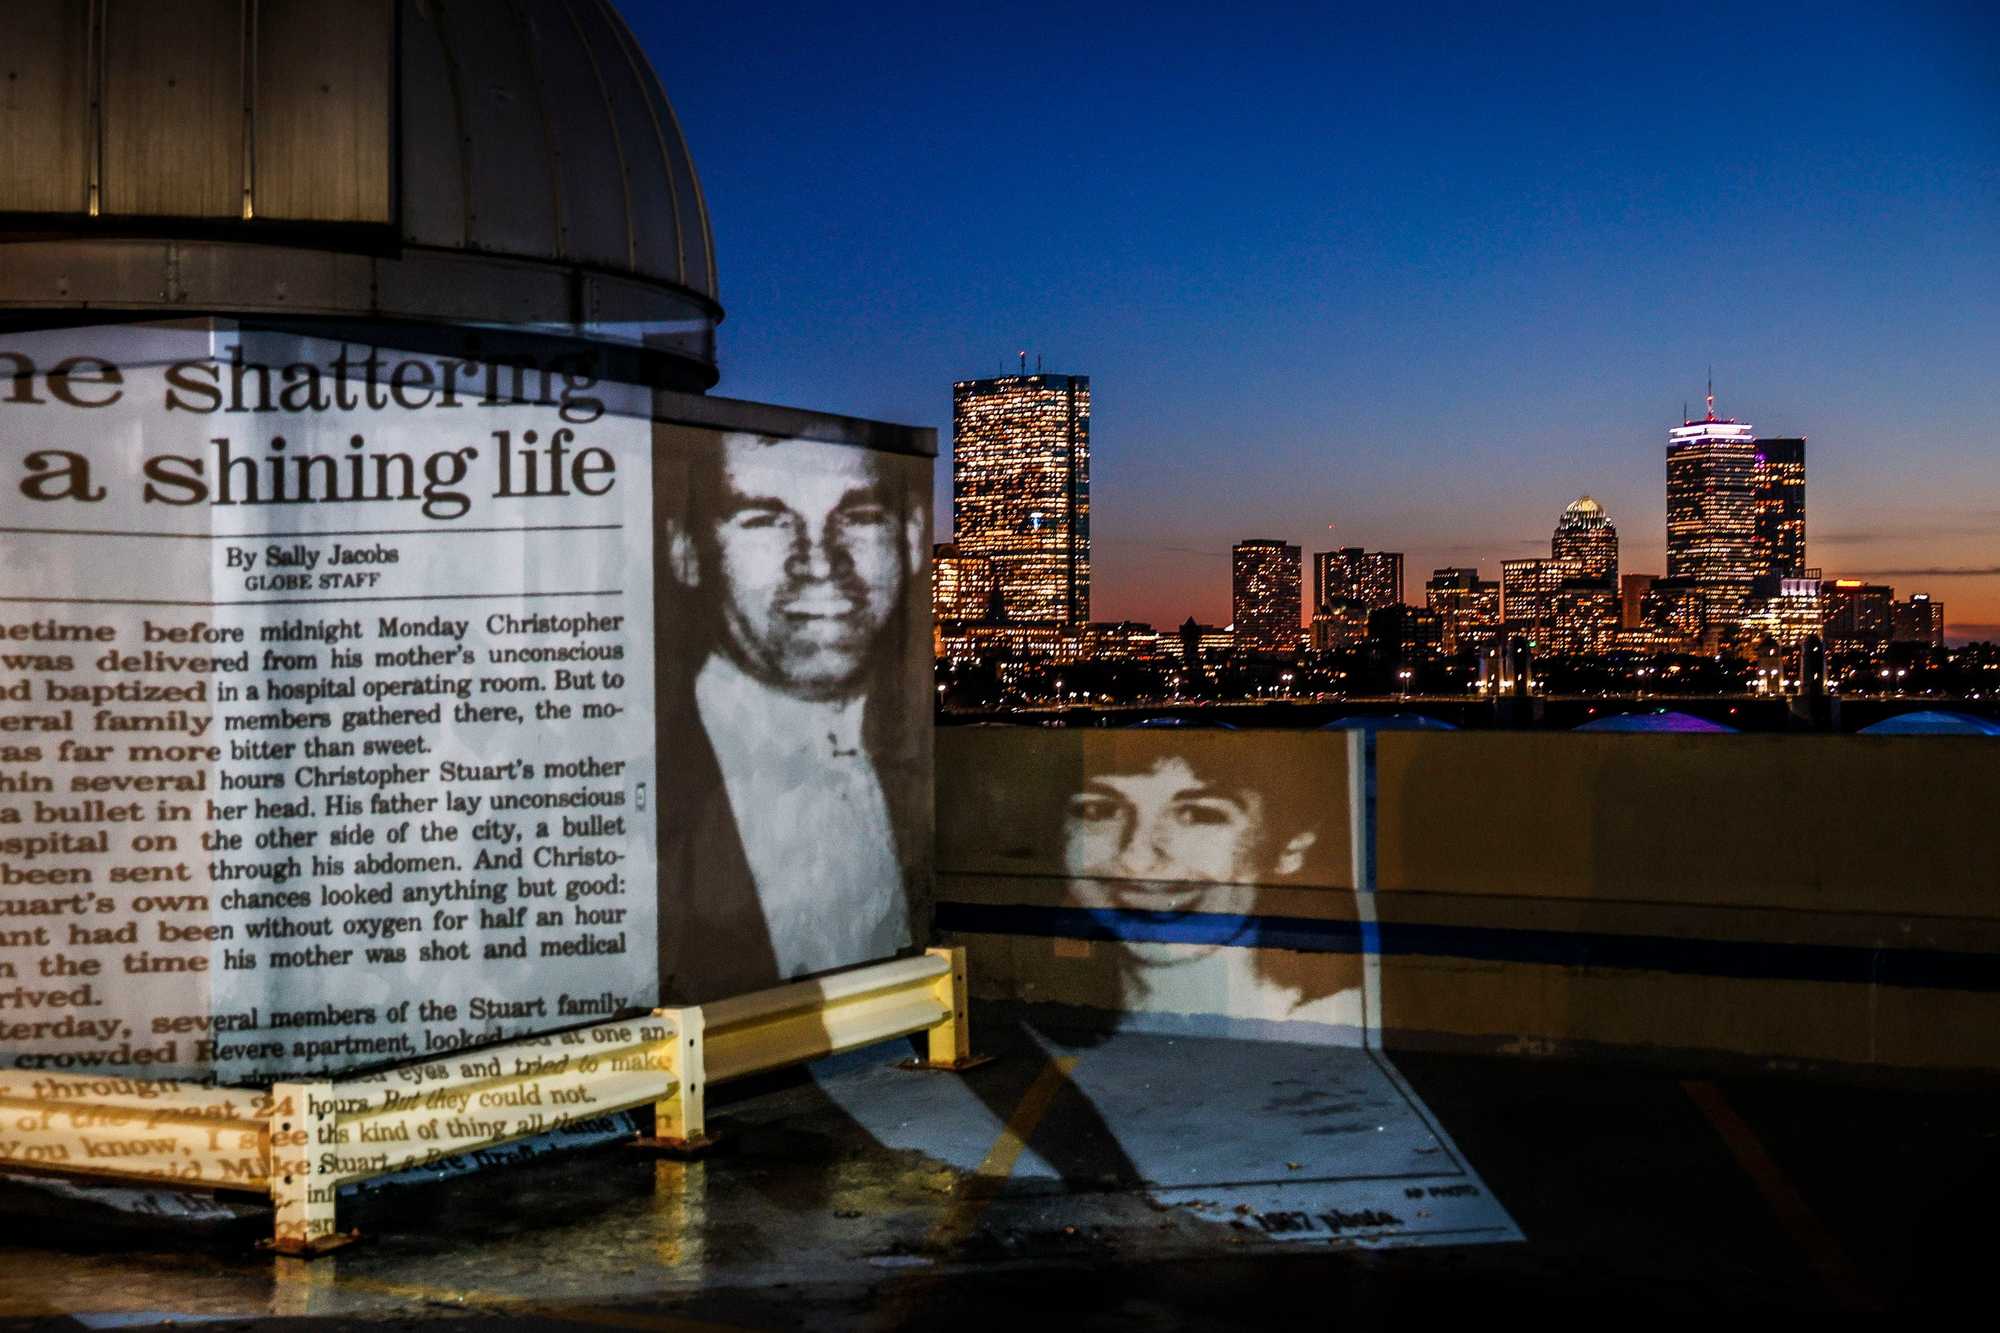 The front page of The Boston Globe from Oct. 25, 1989 — featuring Charles and Carol Stuart — is projected with the Boston city skyline.